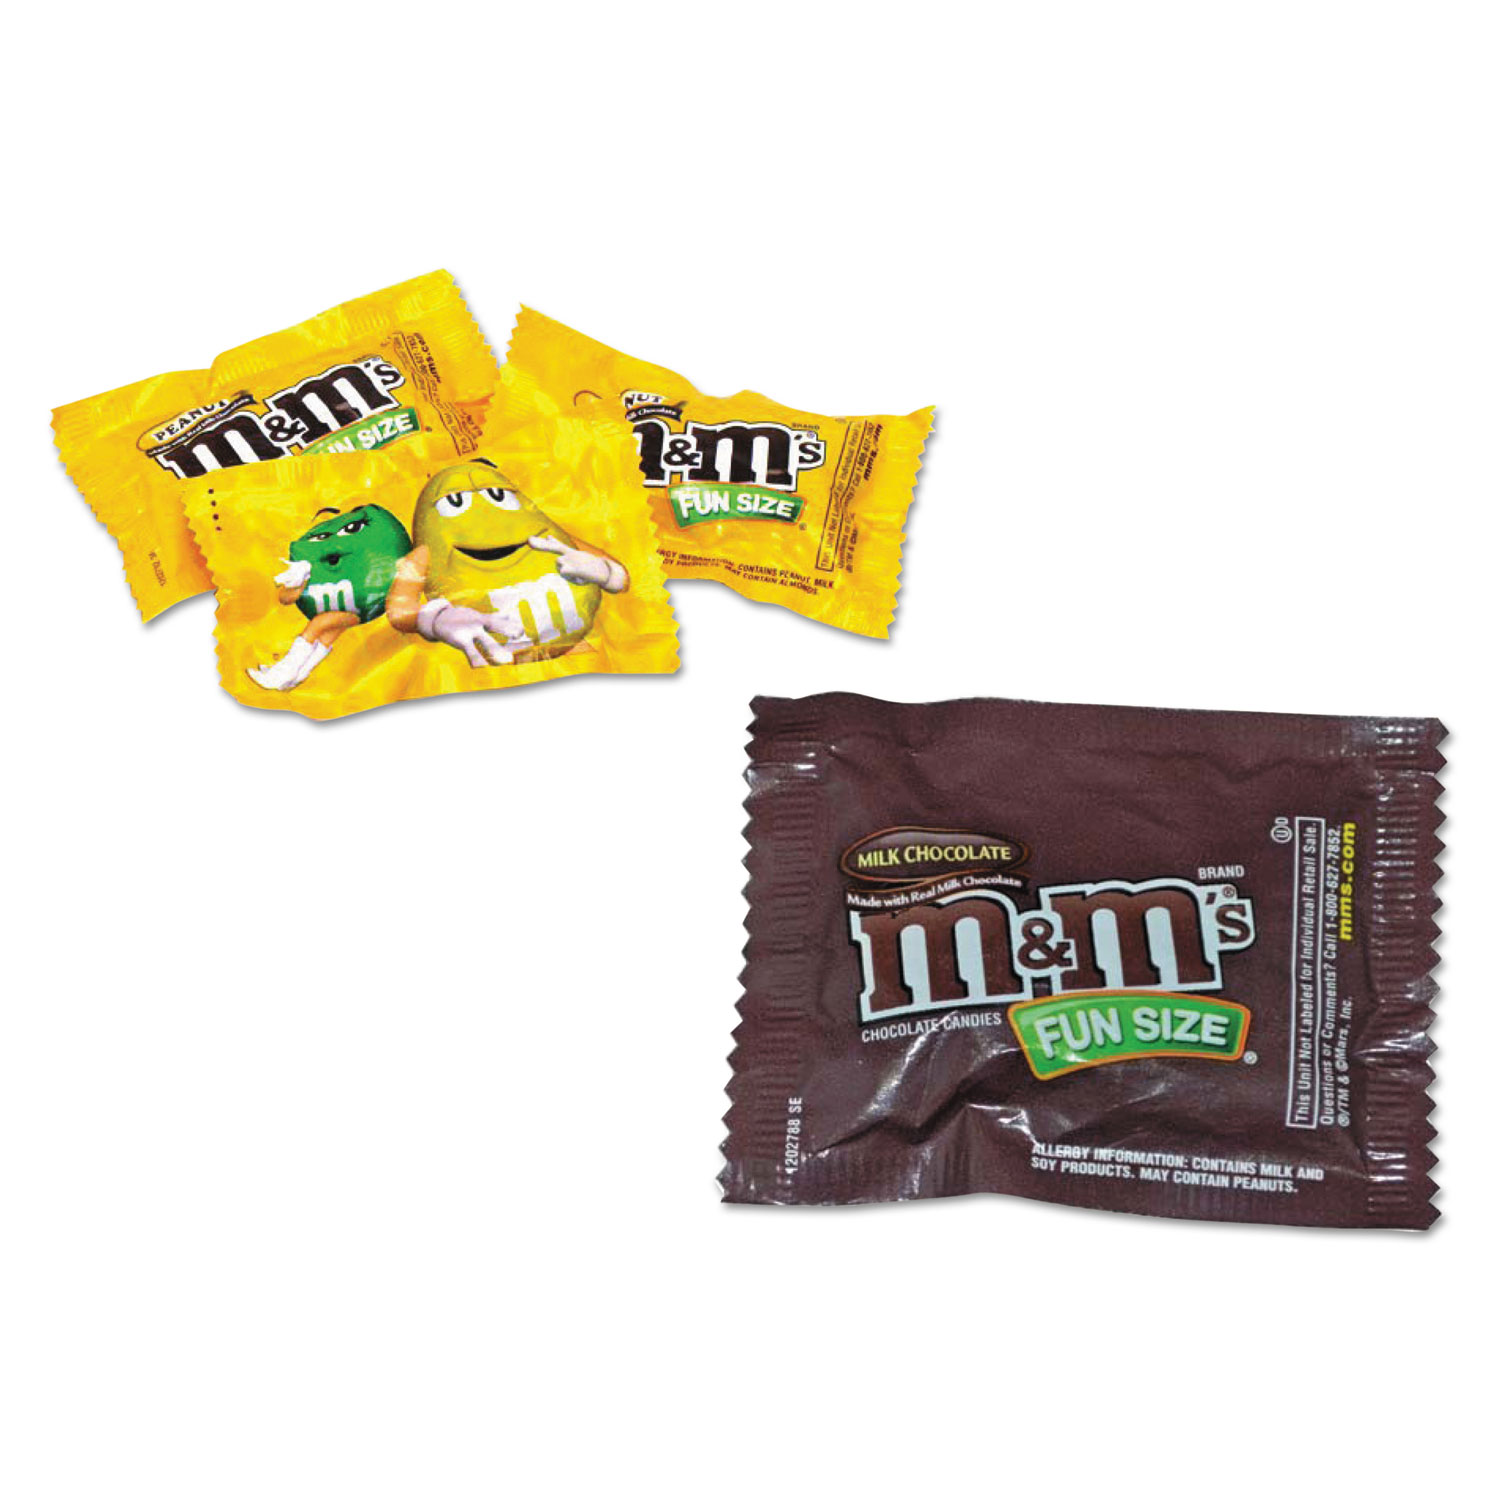 Candy Tubs, Chocolate and Peanut M&Ms, 1.75 lb Resealable Plastic Tub